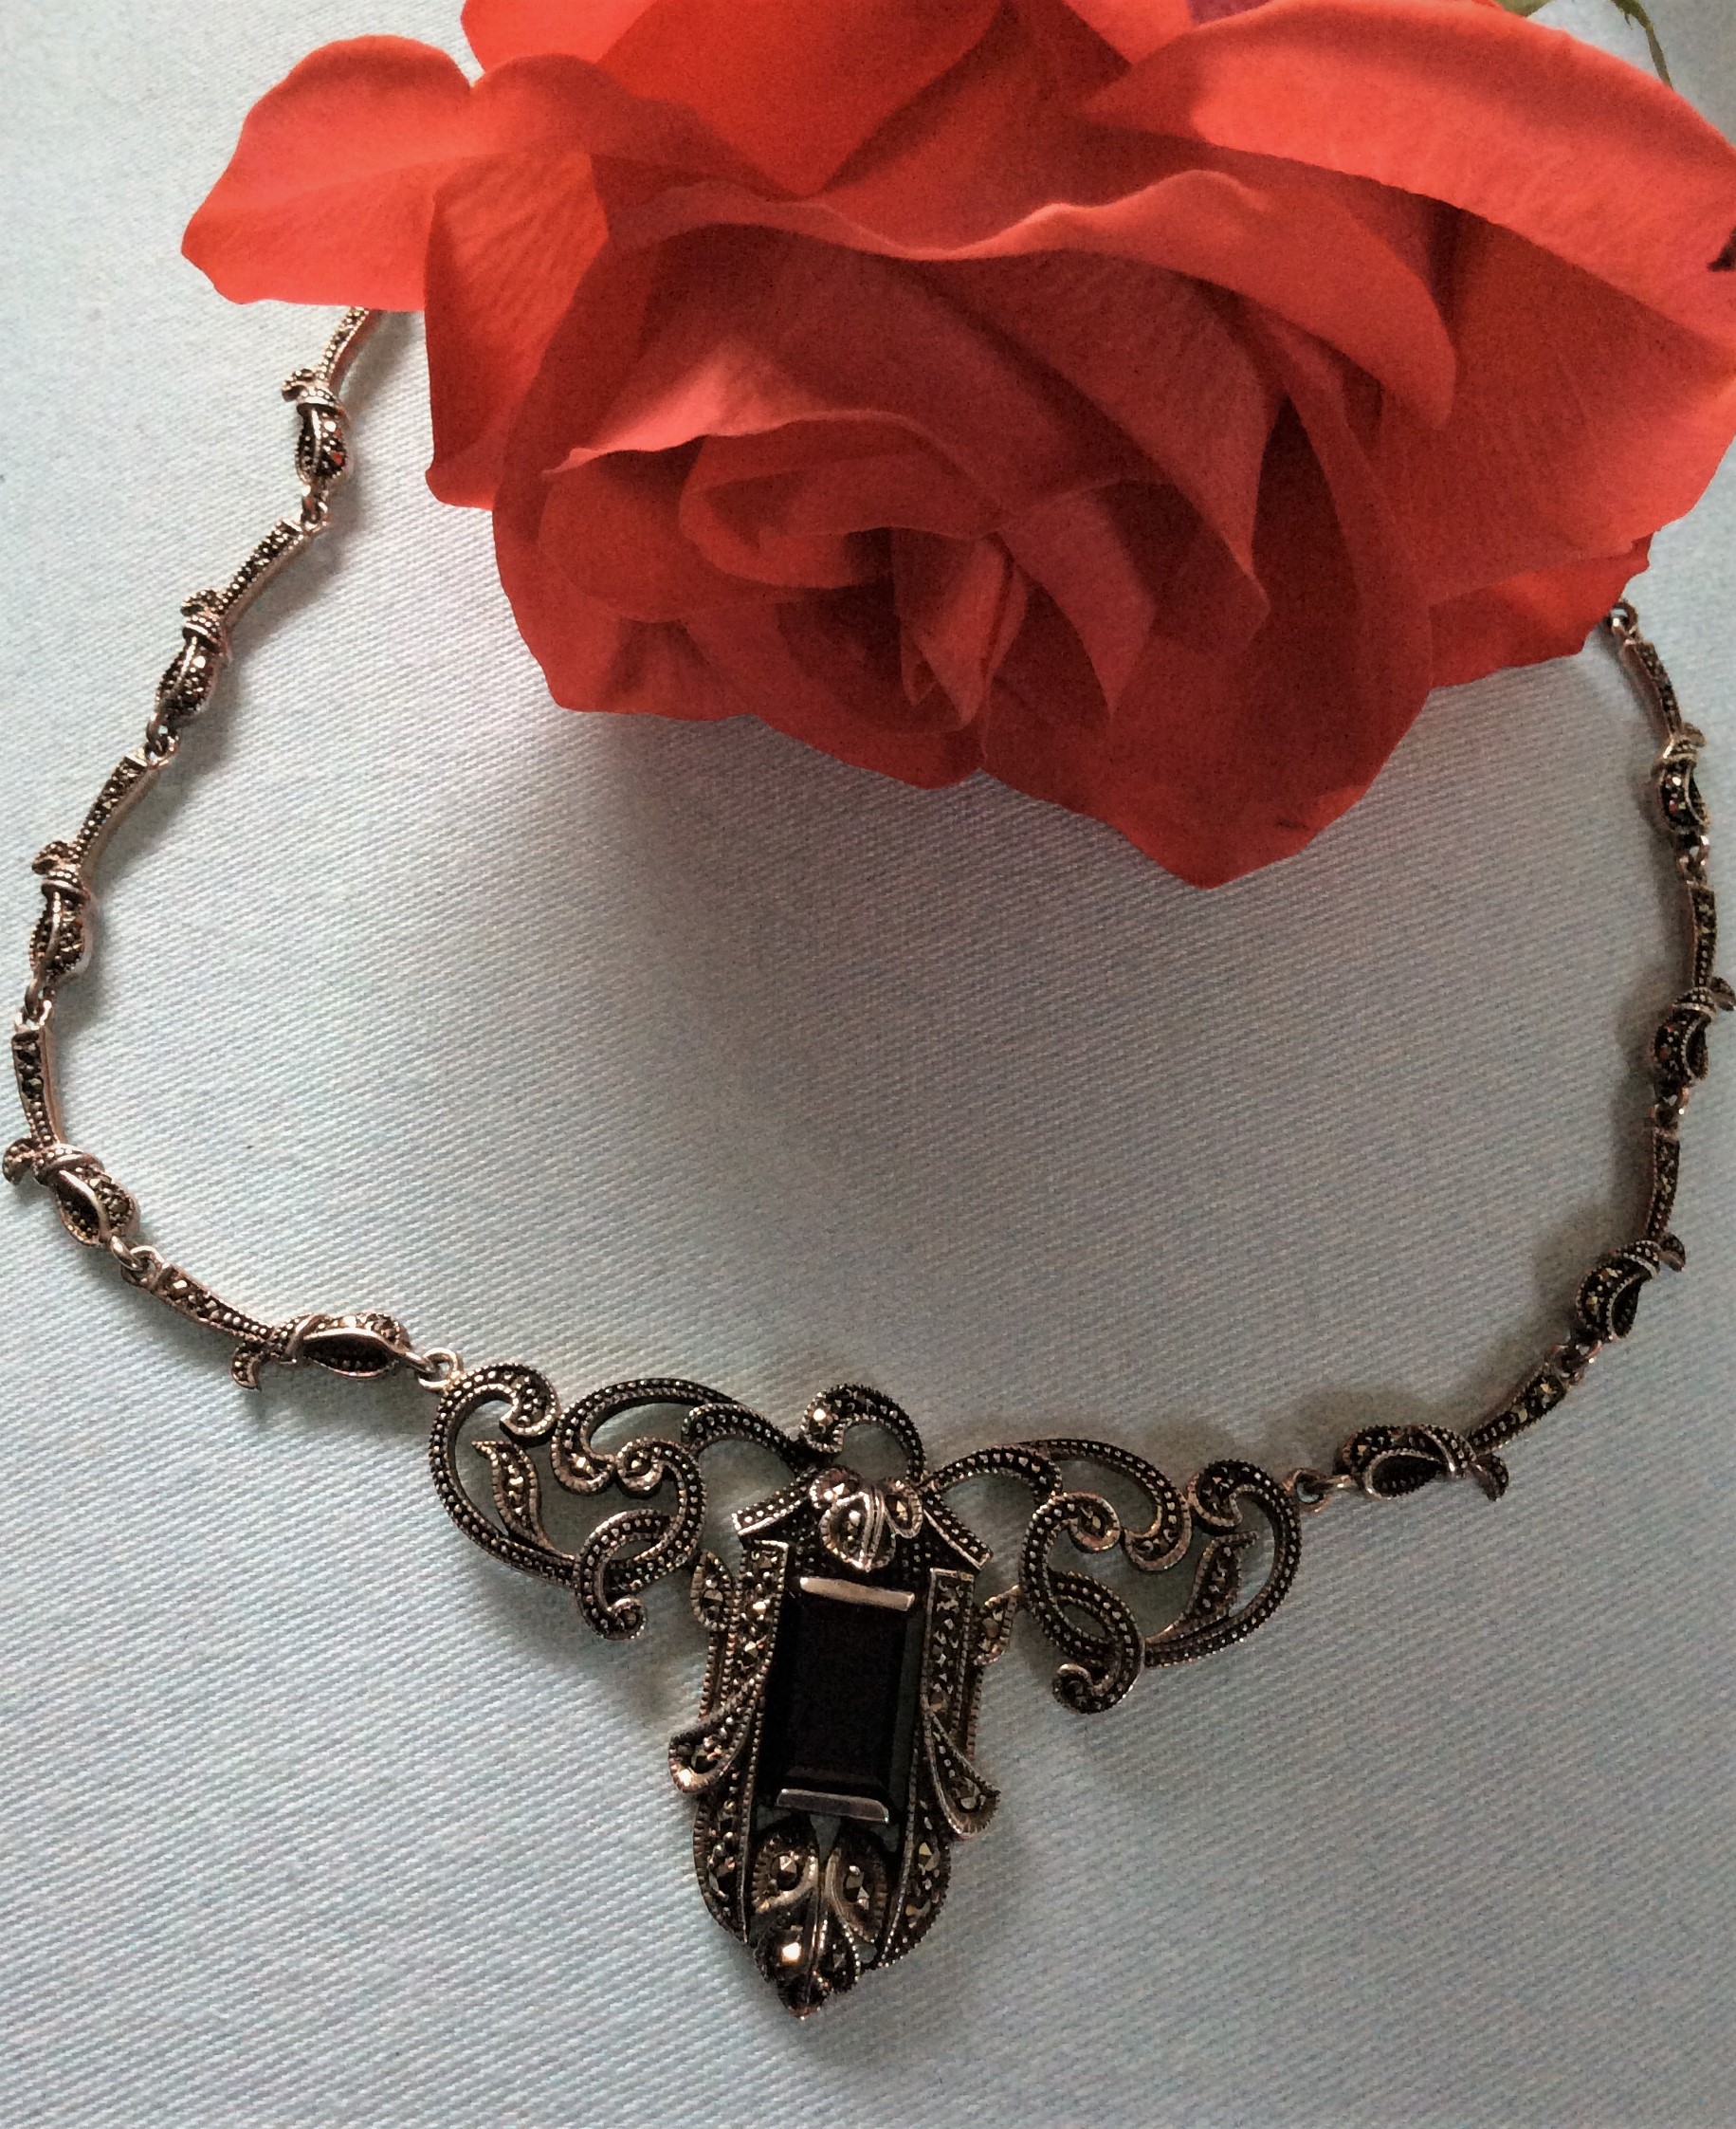 Vintage Hallmarked 925 Sterling Silver & Onyx Art Deco Style Necklace. 